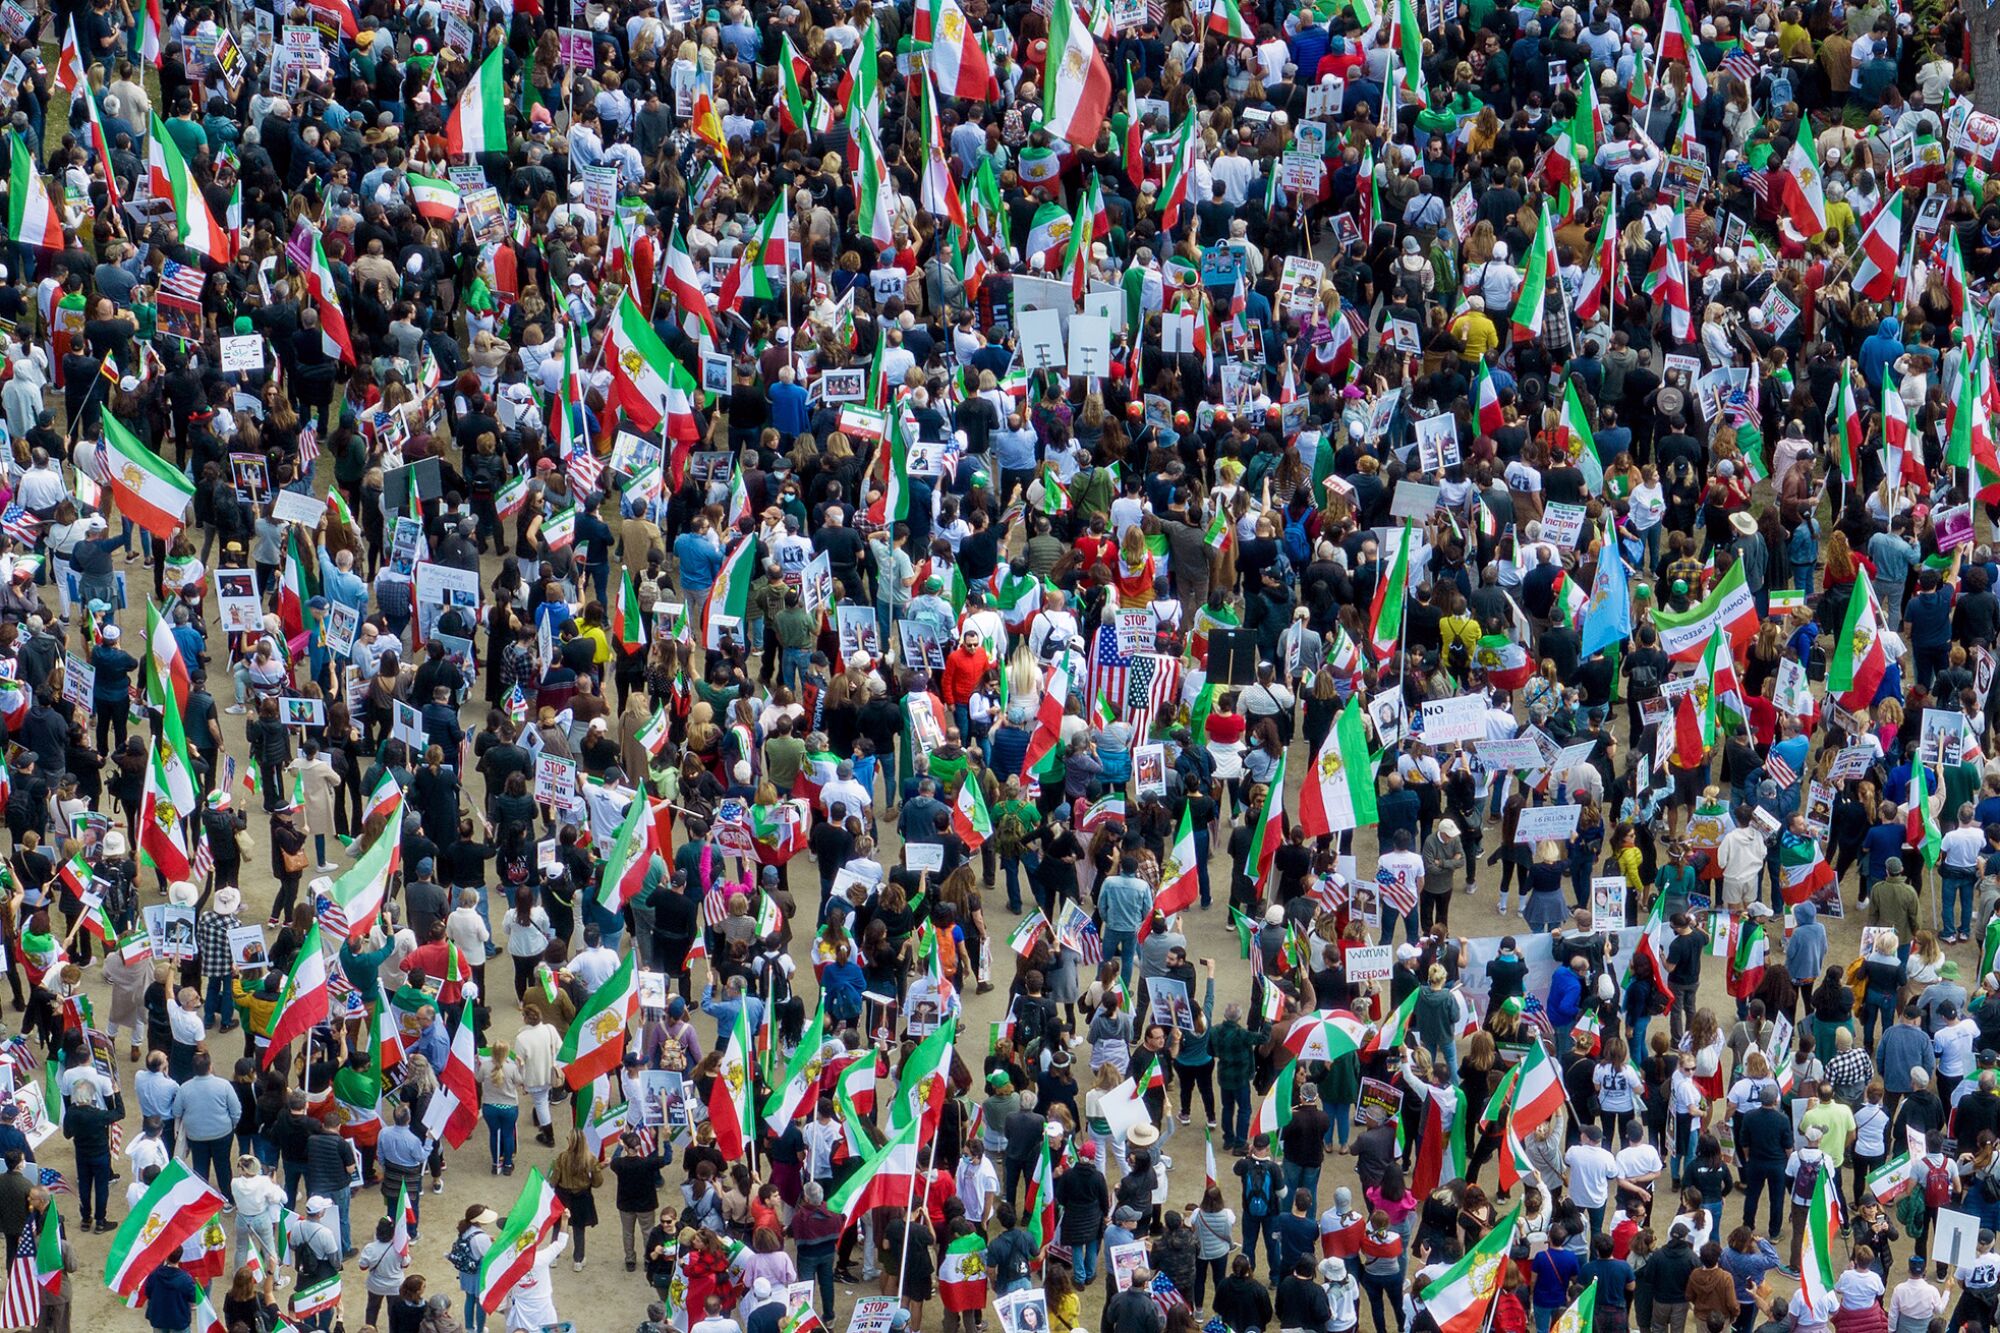 An aerial view of hundreds of small figures, many with Iranian and American flags, fill the entire frame. 